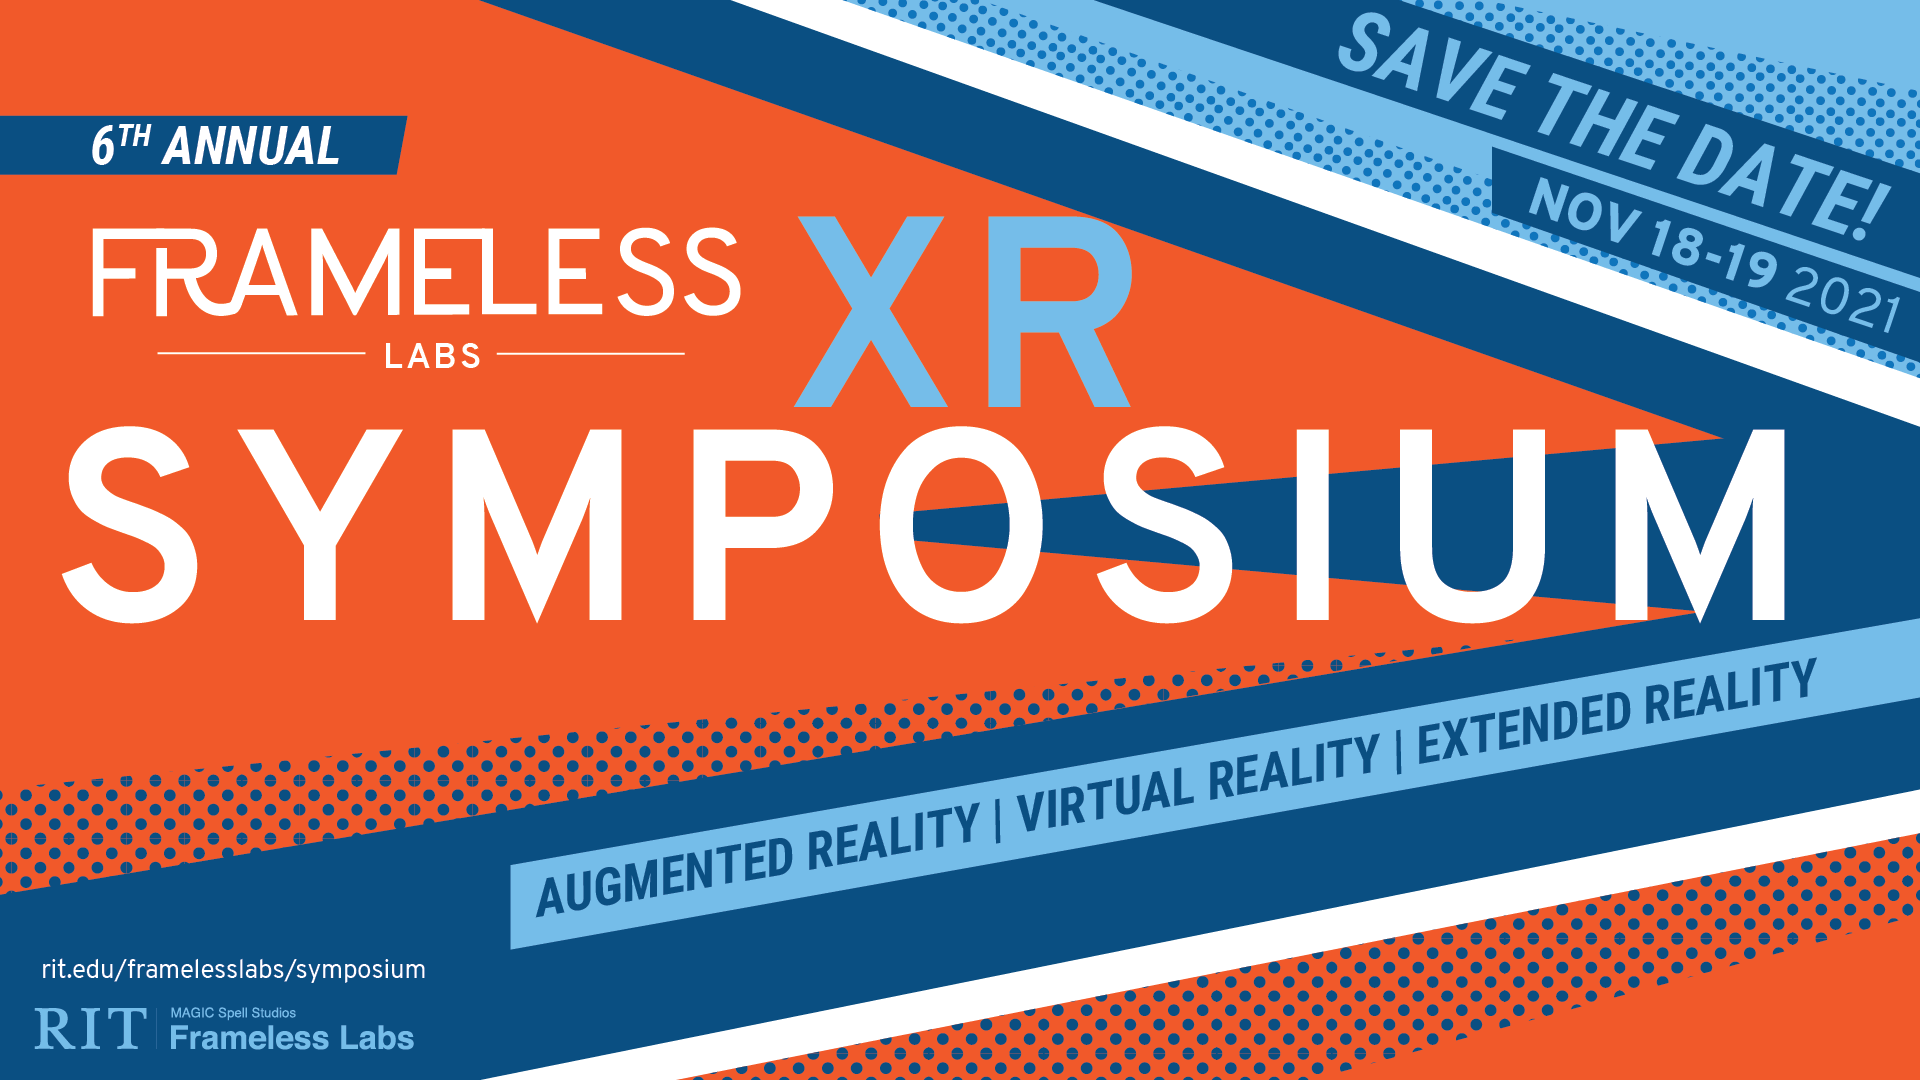 blue and orange graphic announcing Frameless XR symposium